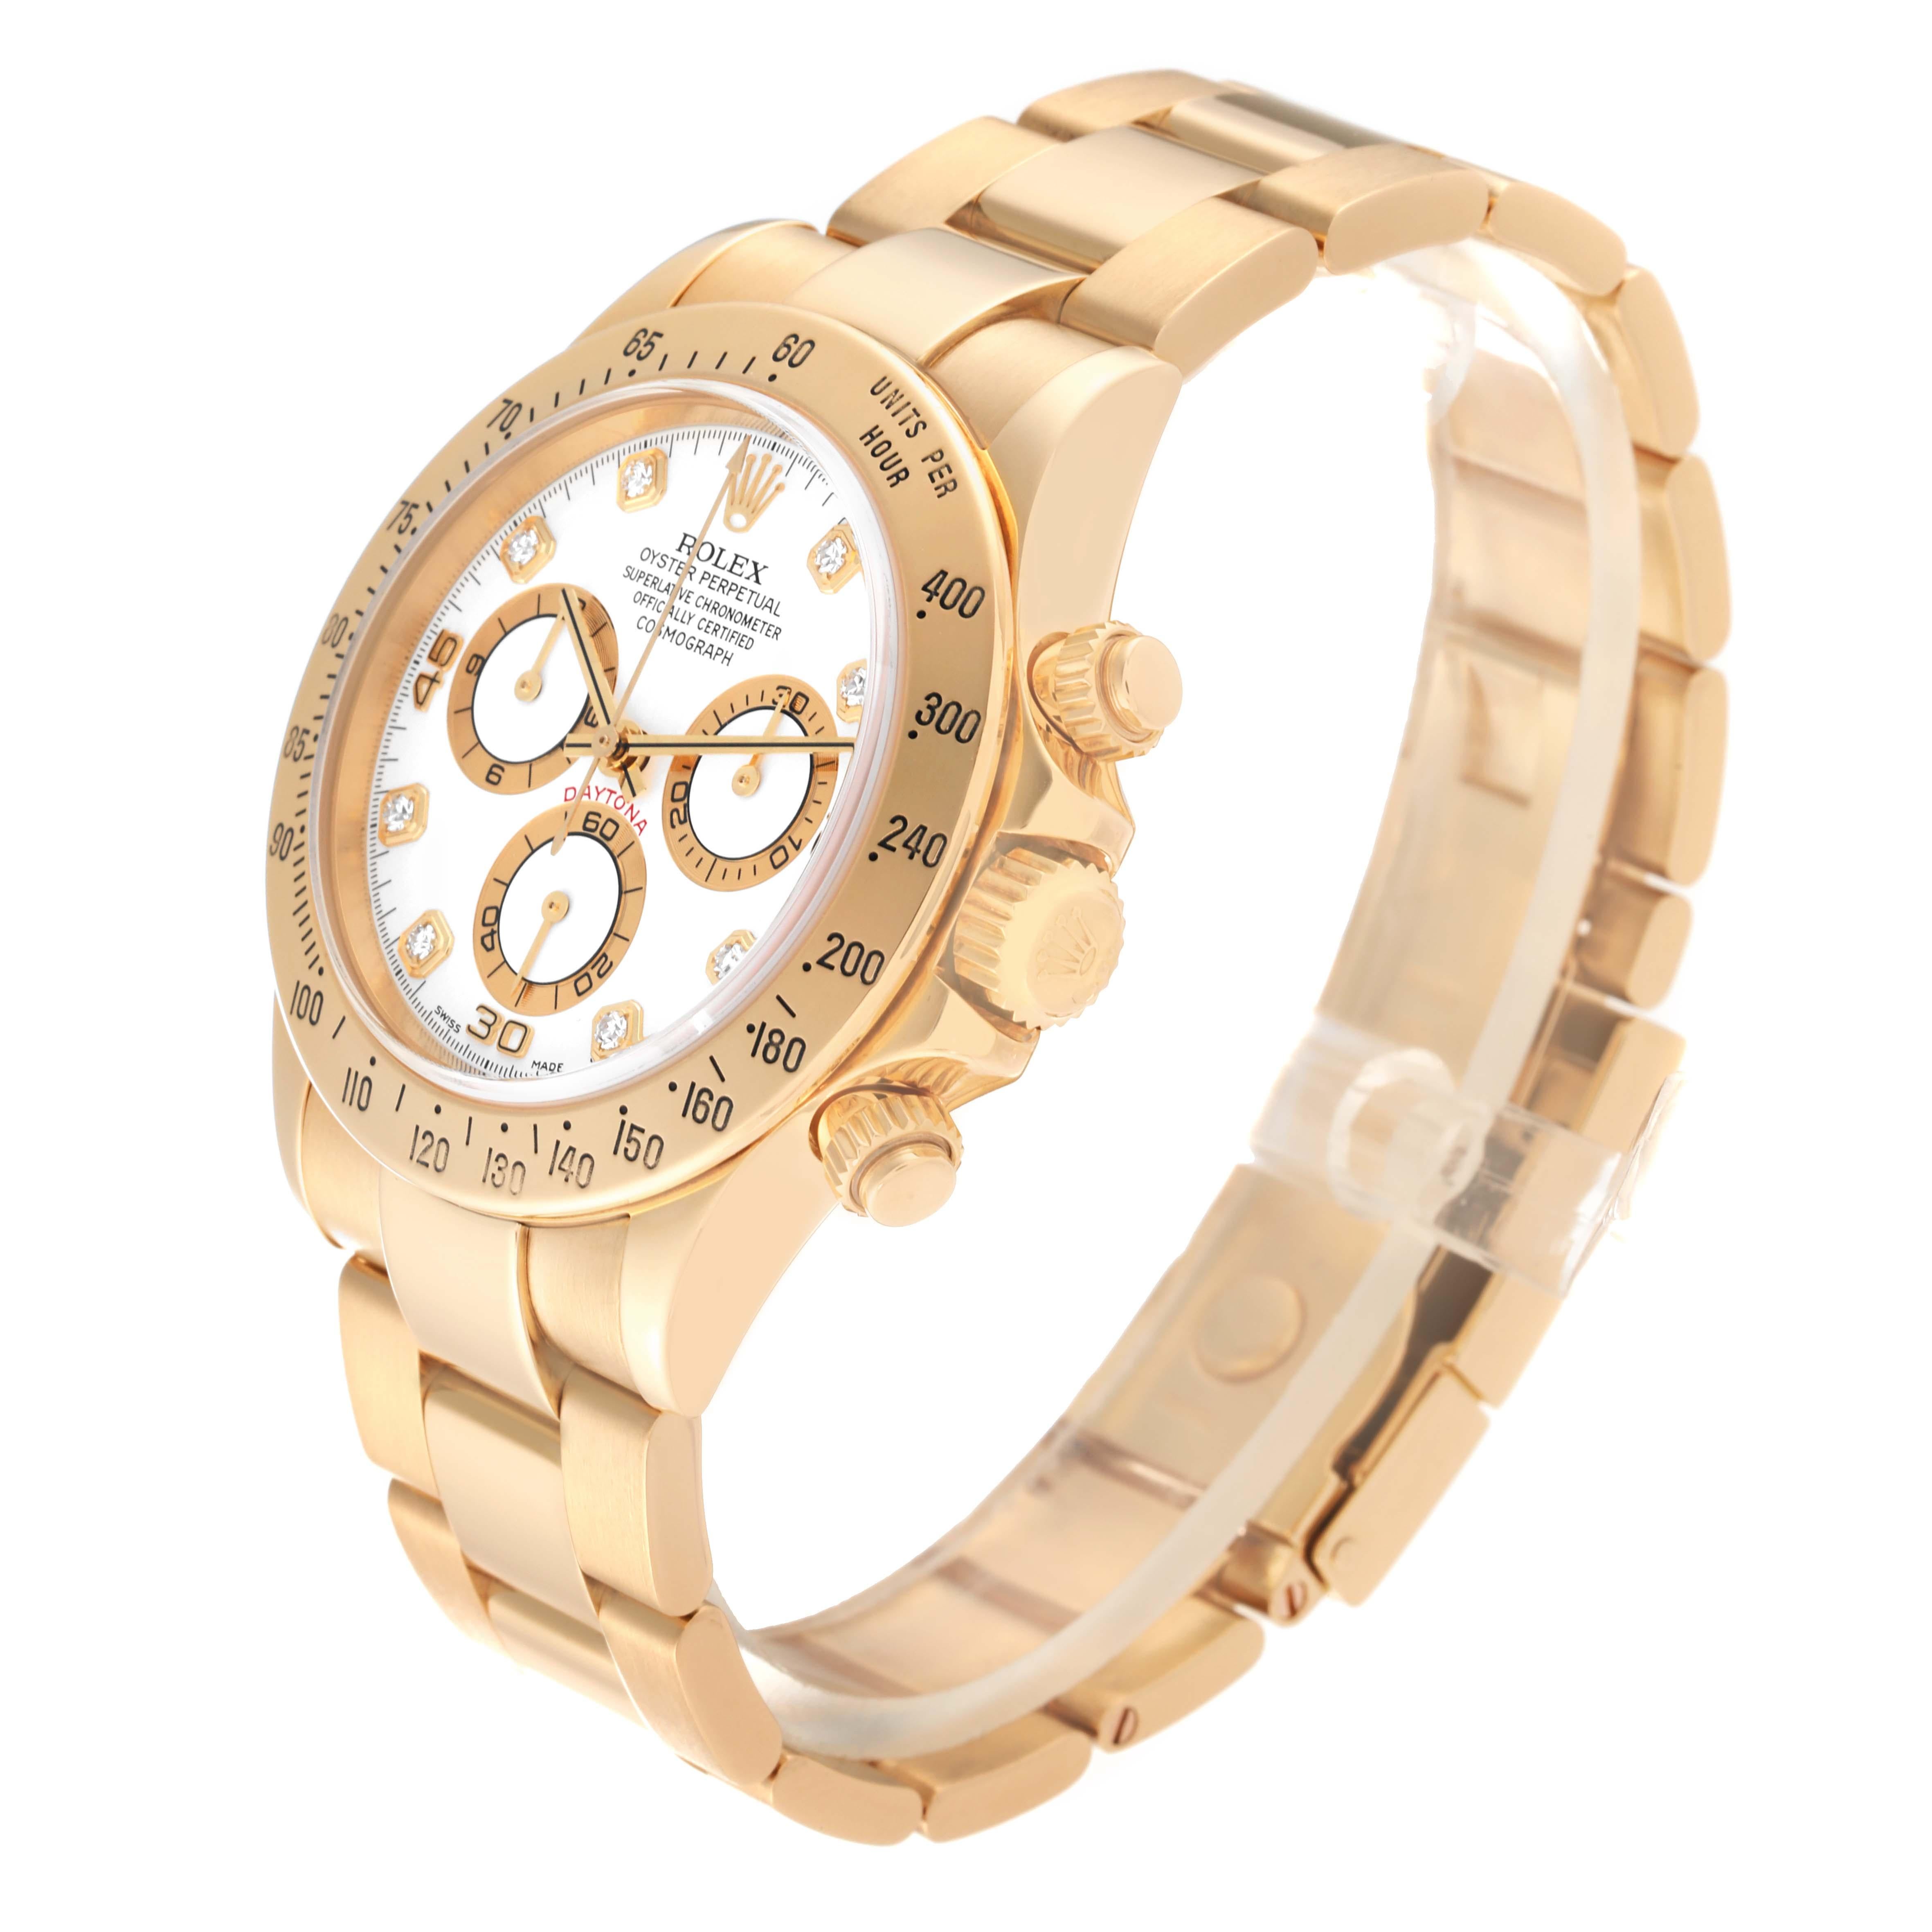 Rolex Daytona Yellow Gold White Diamond Dial Mens Watch 116528 Box Papers For Sale 6